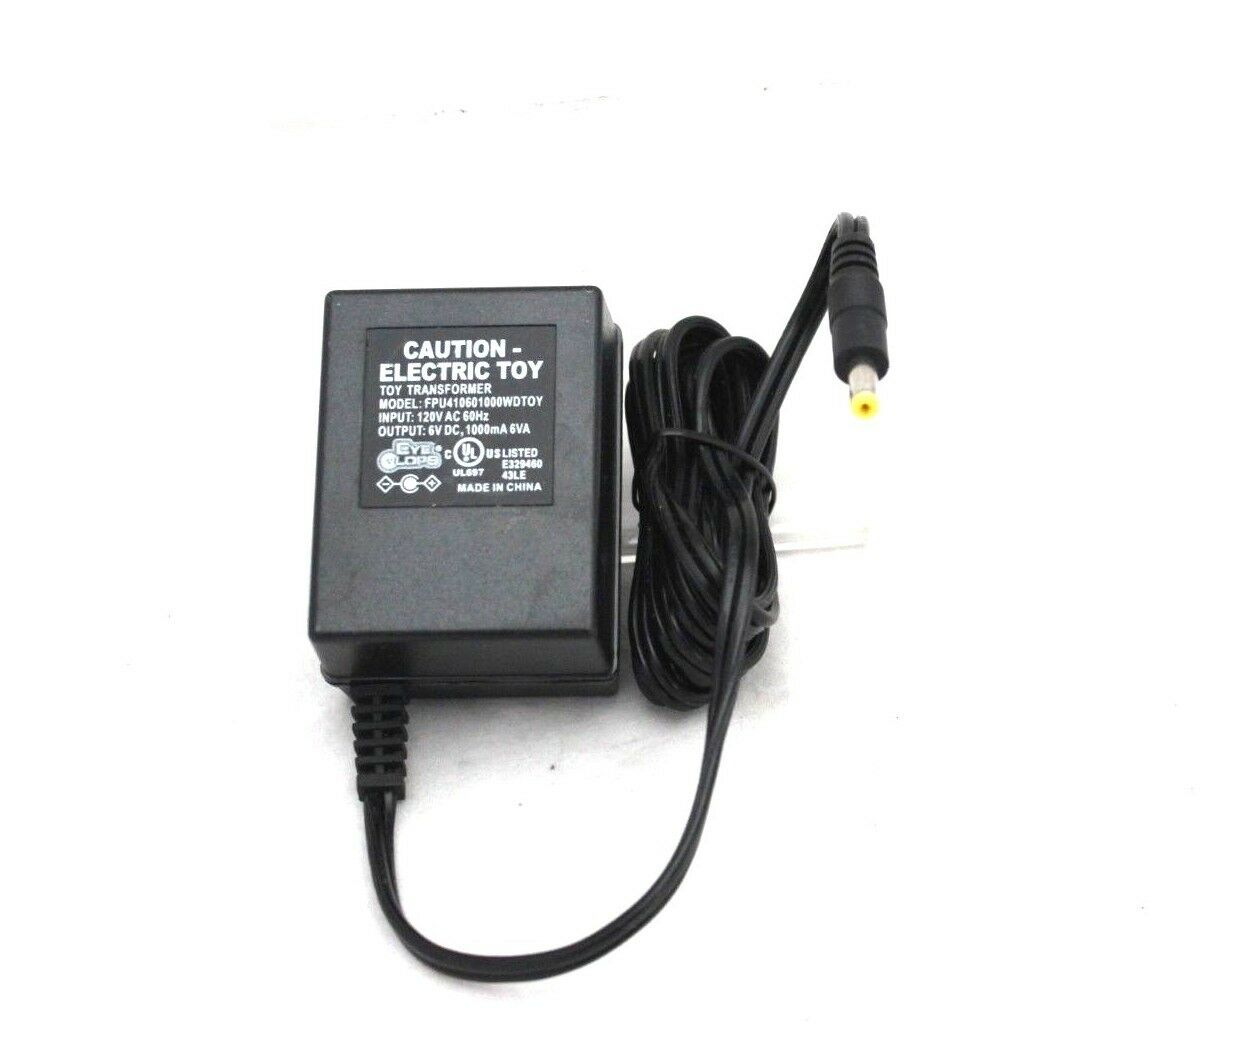 ELECTRIC TOY Transformer Adapter Charger FPU414060100WDTOY 6VDC 100mA 6VA Brand: ELECTRIC TOY Com